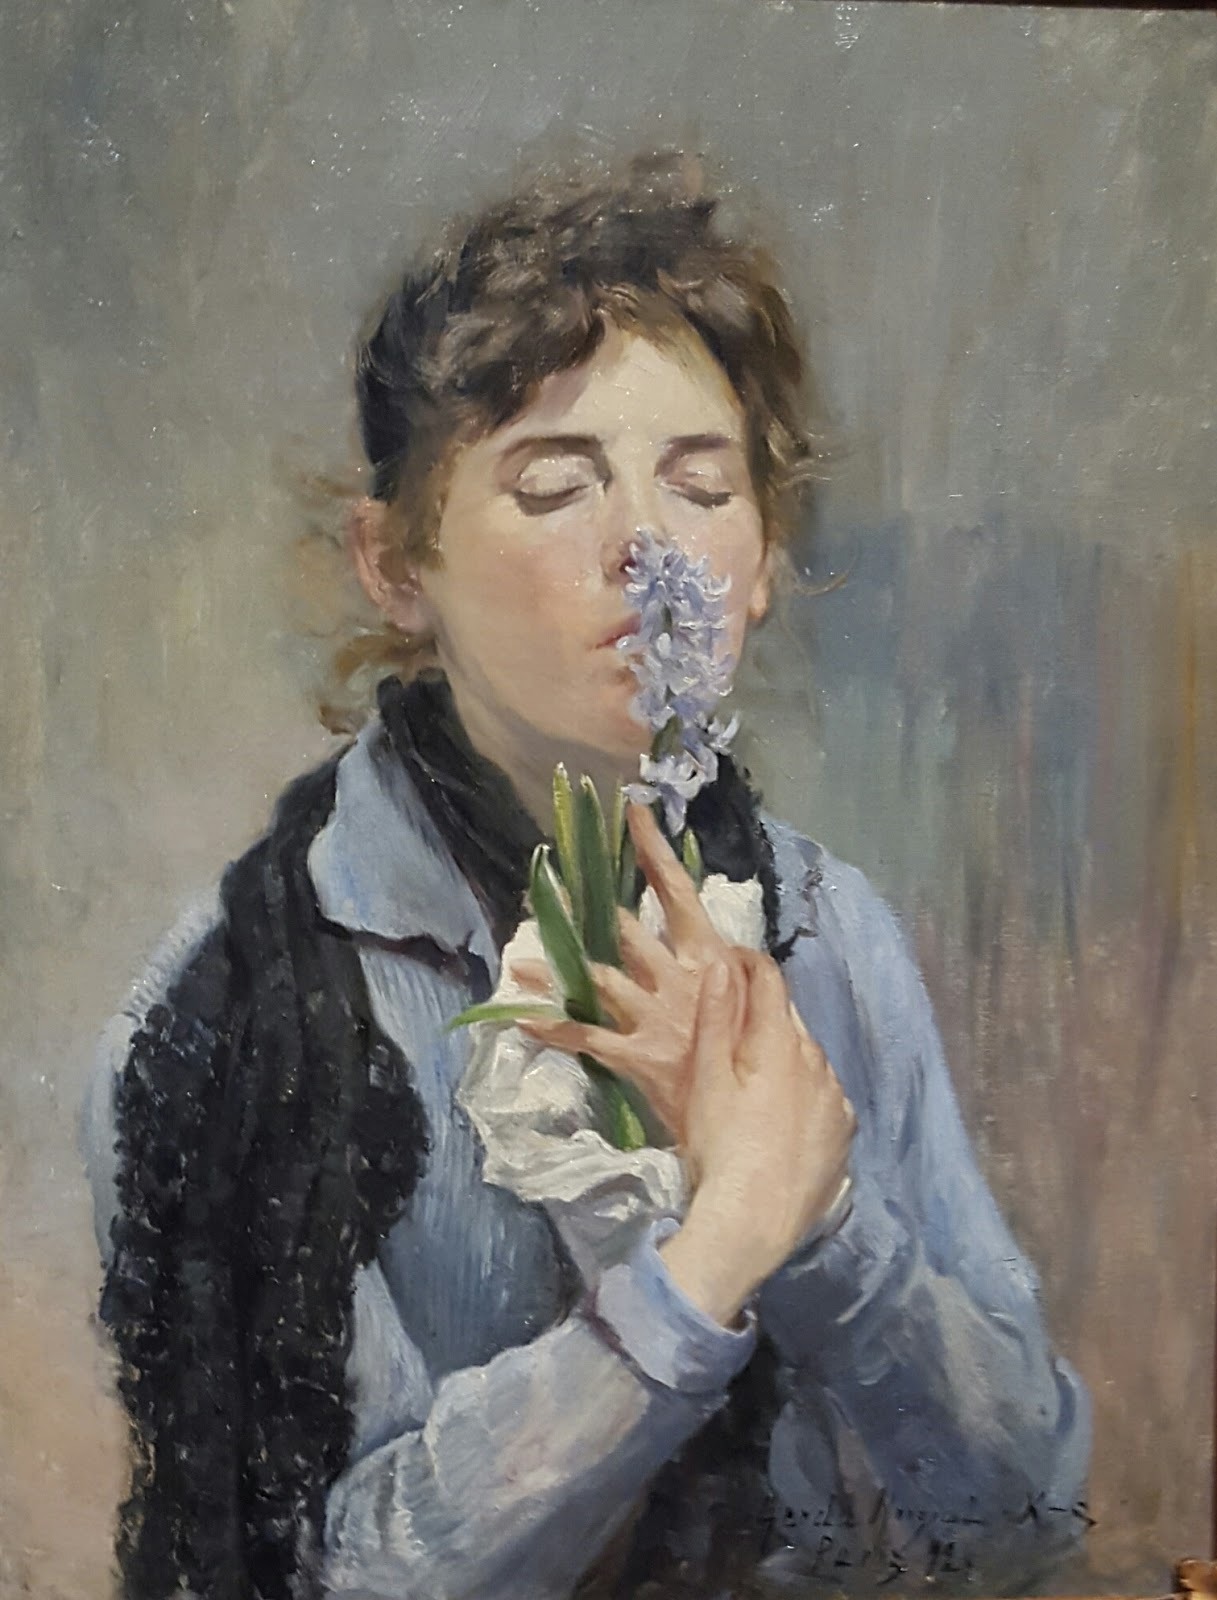 A Blue Hyacinth in Paris. Self portrait. by Gerda Roosval-Kallstenius - 1892 - 66 x 51.5 cm private collection